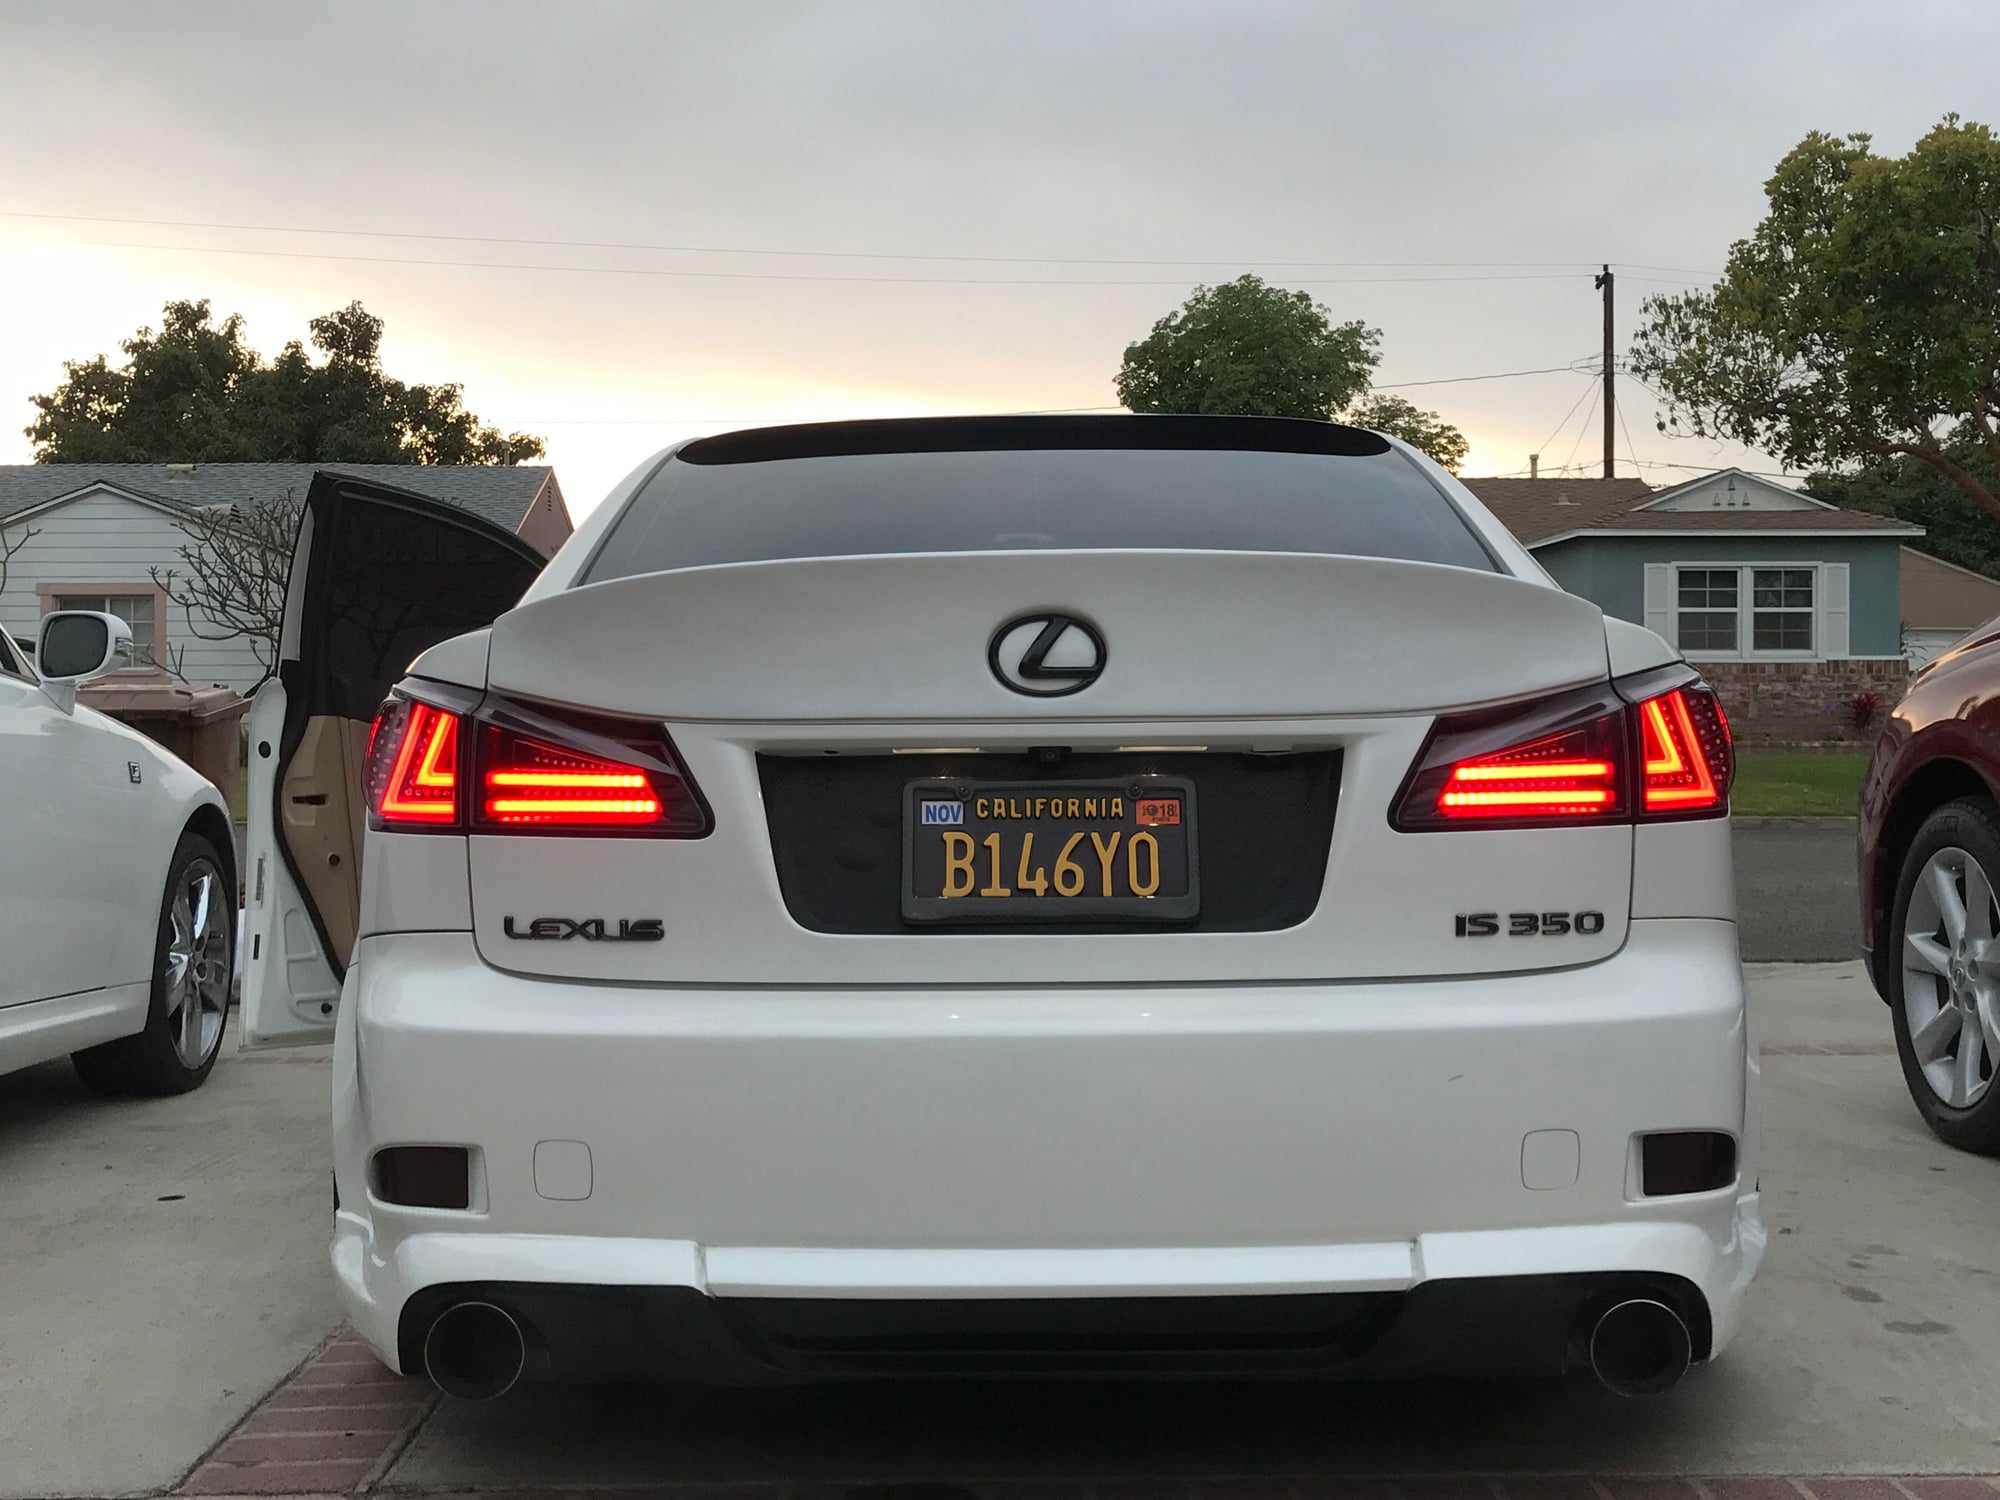 Lights - BNIB IS250/350/IS-F Black housing with clear lenses Spec-D Taillight - New - 2006 to 2008 Lexus IS350 - 2006 to 2008 Lexus IS F - 2006 to 2008 Lexus IS250 - Garden Grove, CA 92840, United States